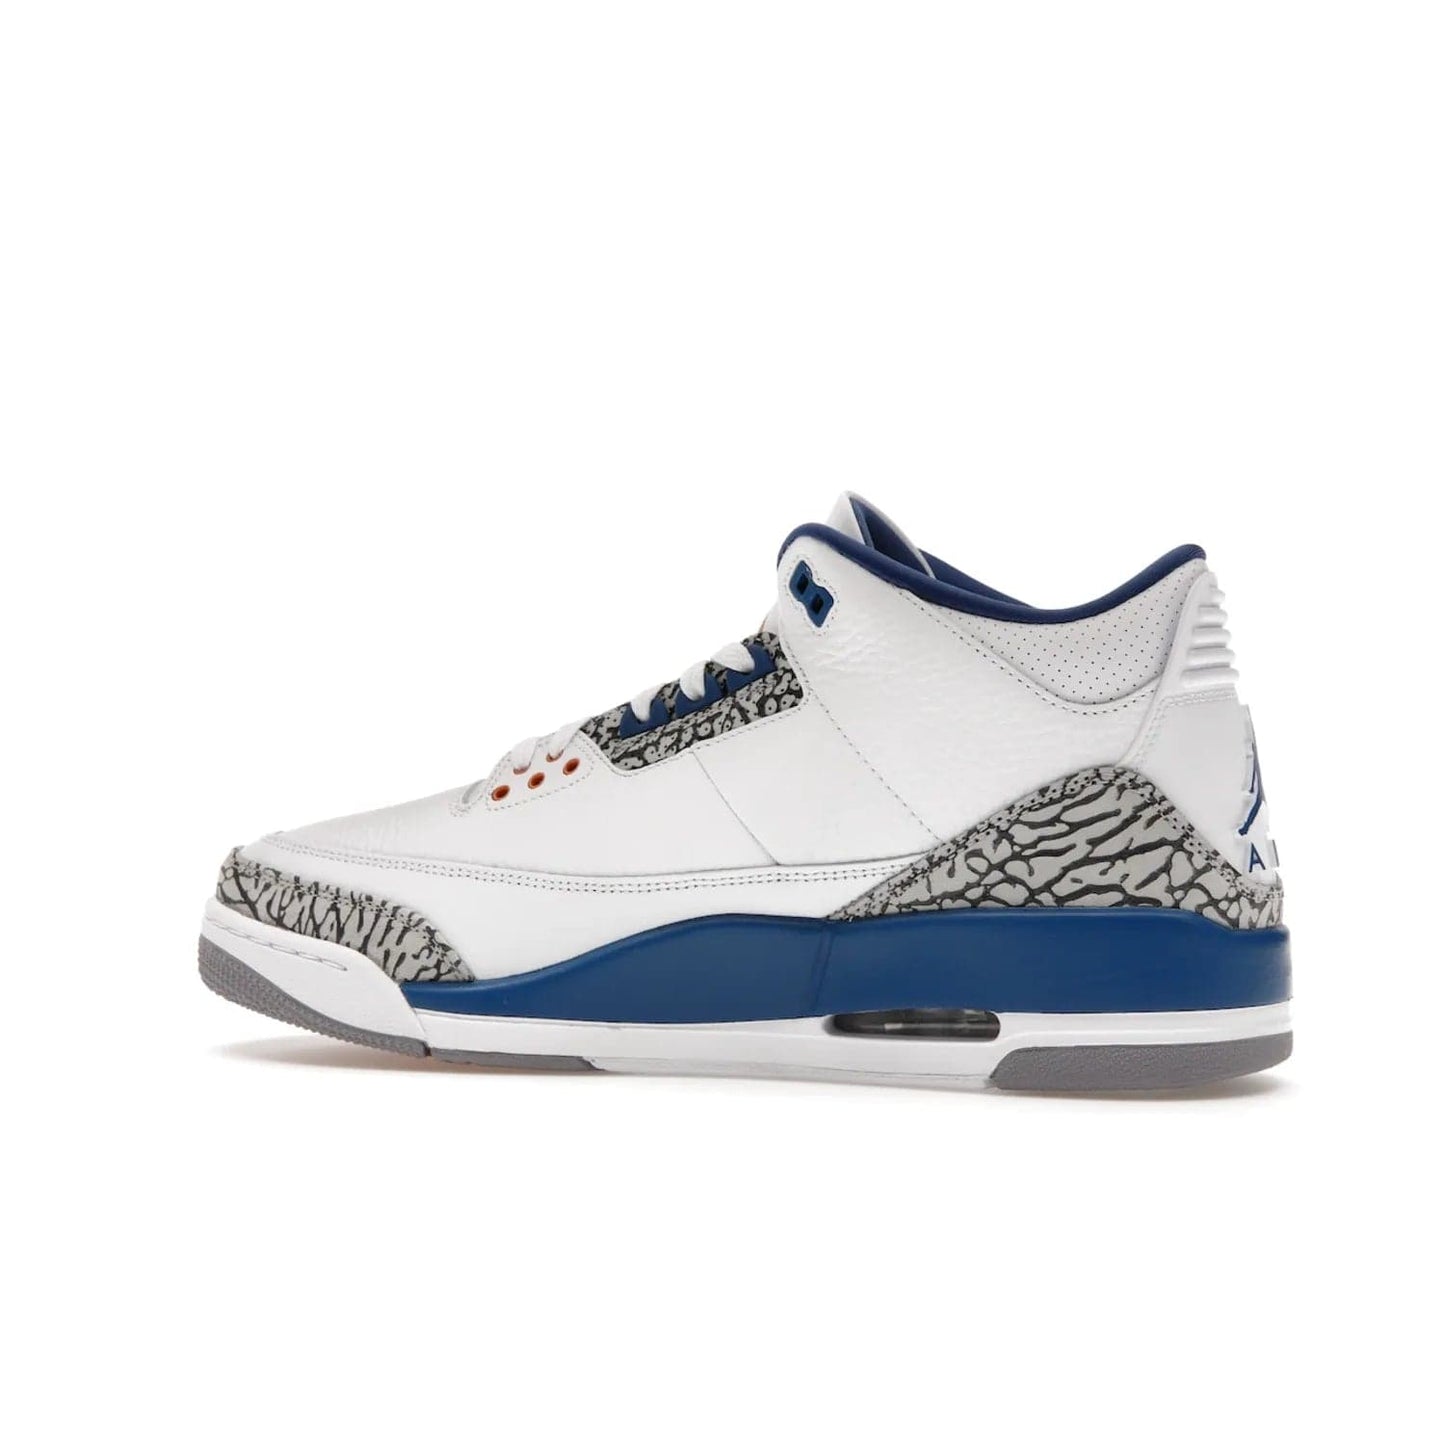 Jordan 3 Retro Wizards - Image 21 - Only at www.BallersClubKickz.com - ##
Special tribute sneaker from Jordan Brand to Michael Jordan's time with the Washington Wizards. Iconic white upper, orange Jumpman logo, blue accents, metallic copper details, and cement grey outsole. Buy the Air Jordan 3 Retro Wizards April 29, 2023.